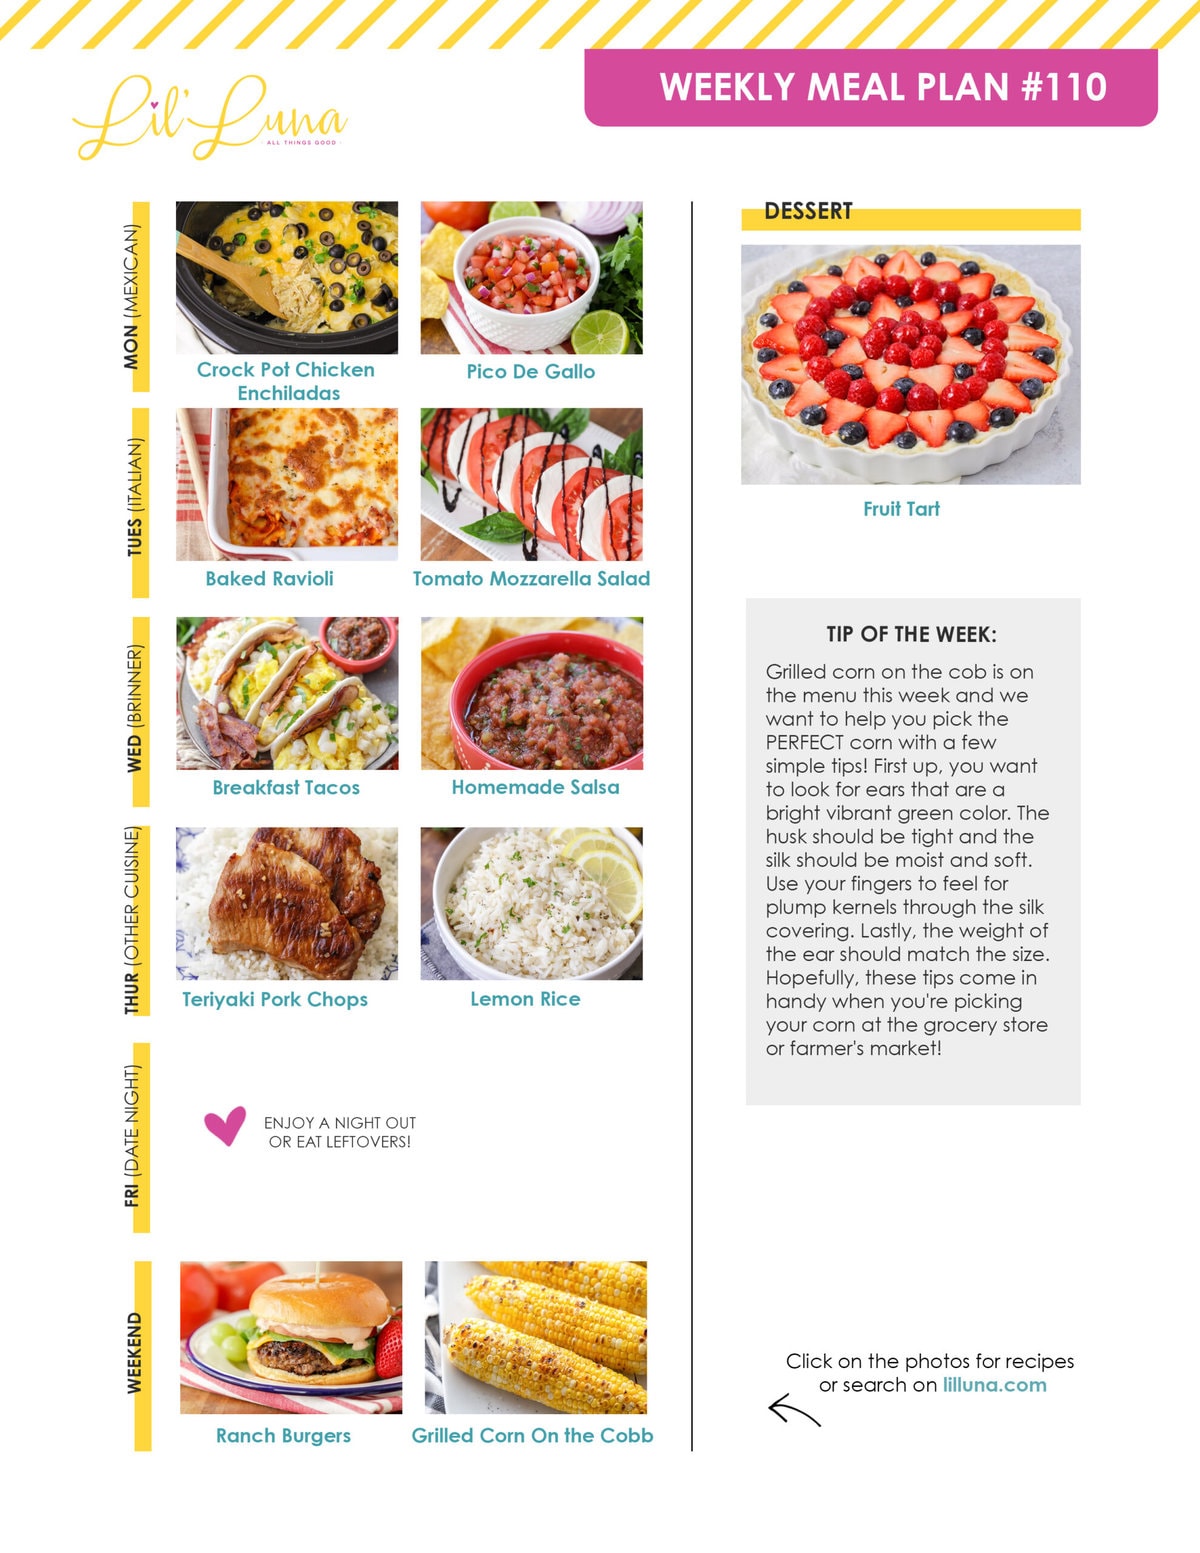 A graphic showing Meal Plan #110.